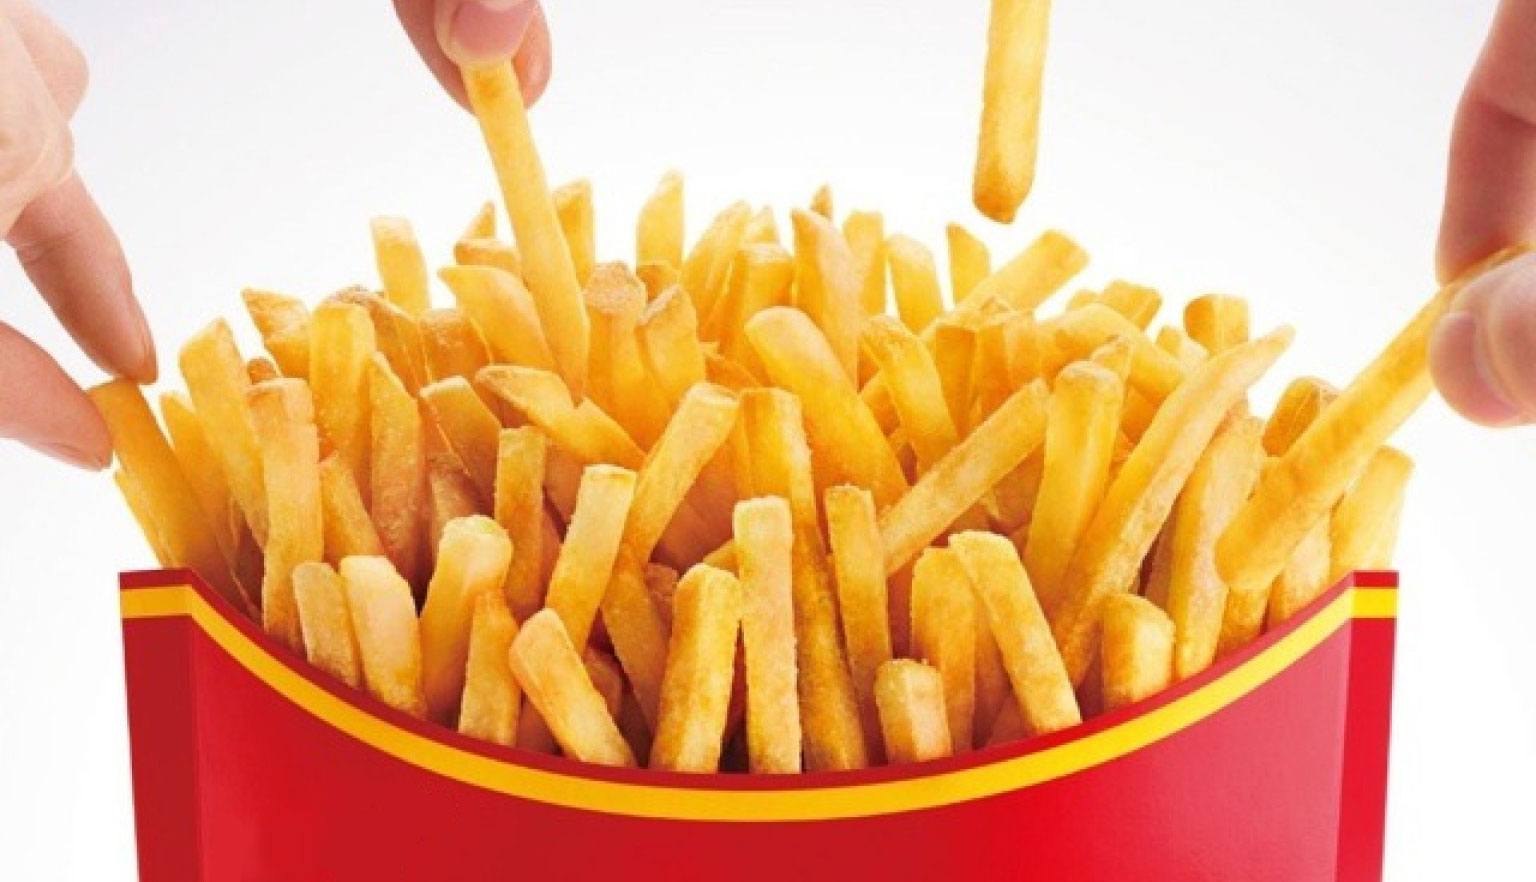  McDonald’s offre all-you-can-eat di patatine fritte